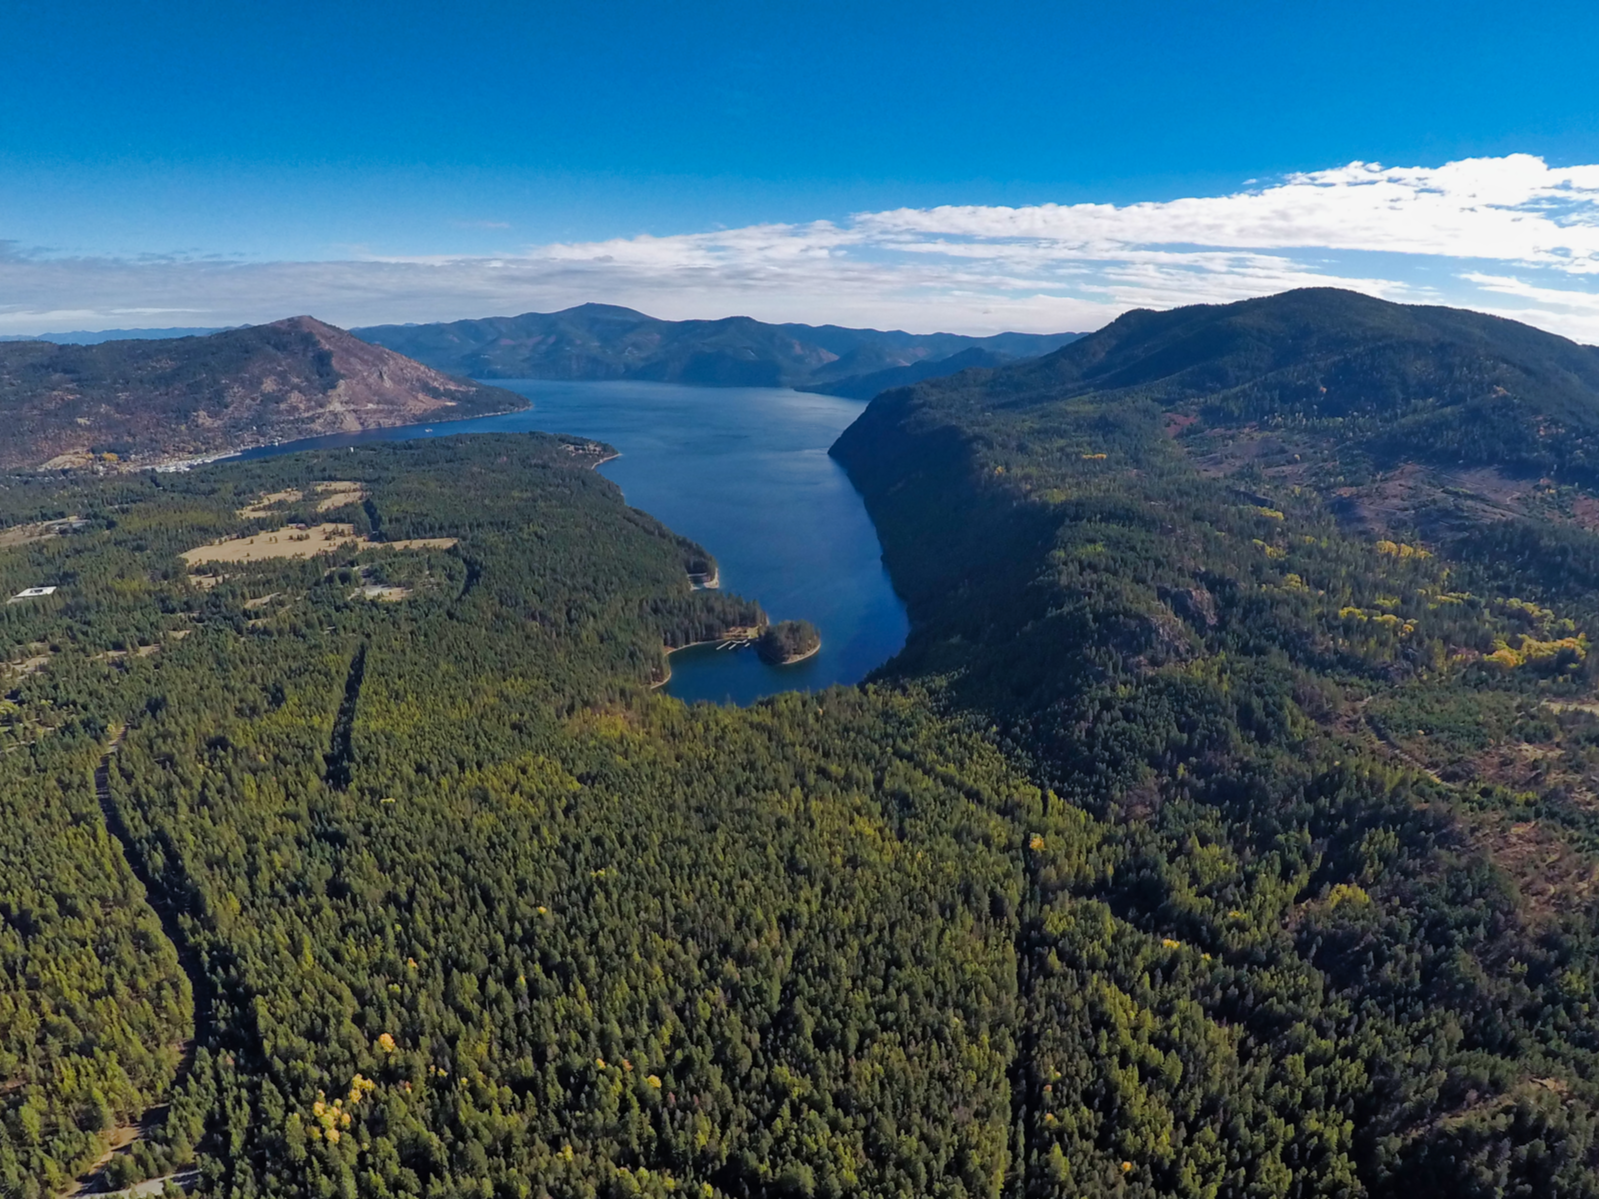 Aerial view of the thick forest surrounding Lake Pend Oreille and Farragut State Park with its mountain skyline, one of the best things to see in Idaho